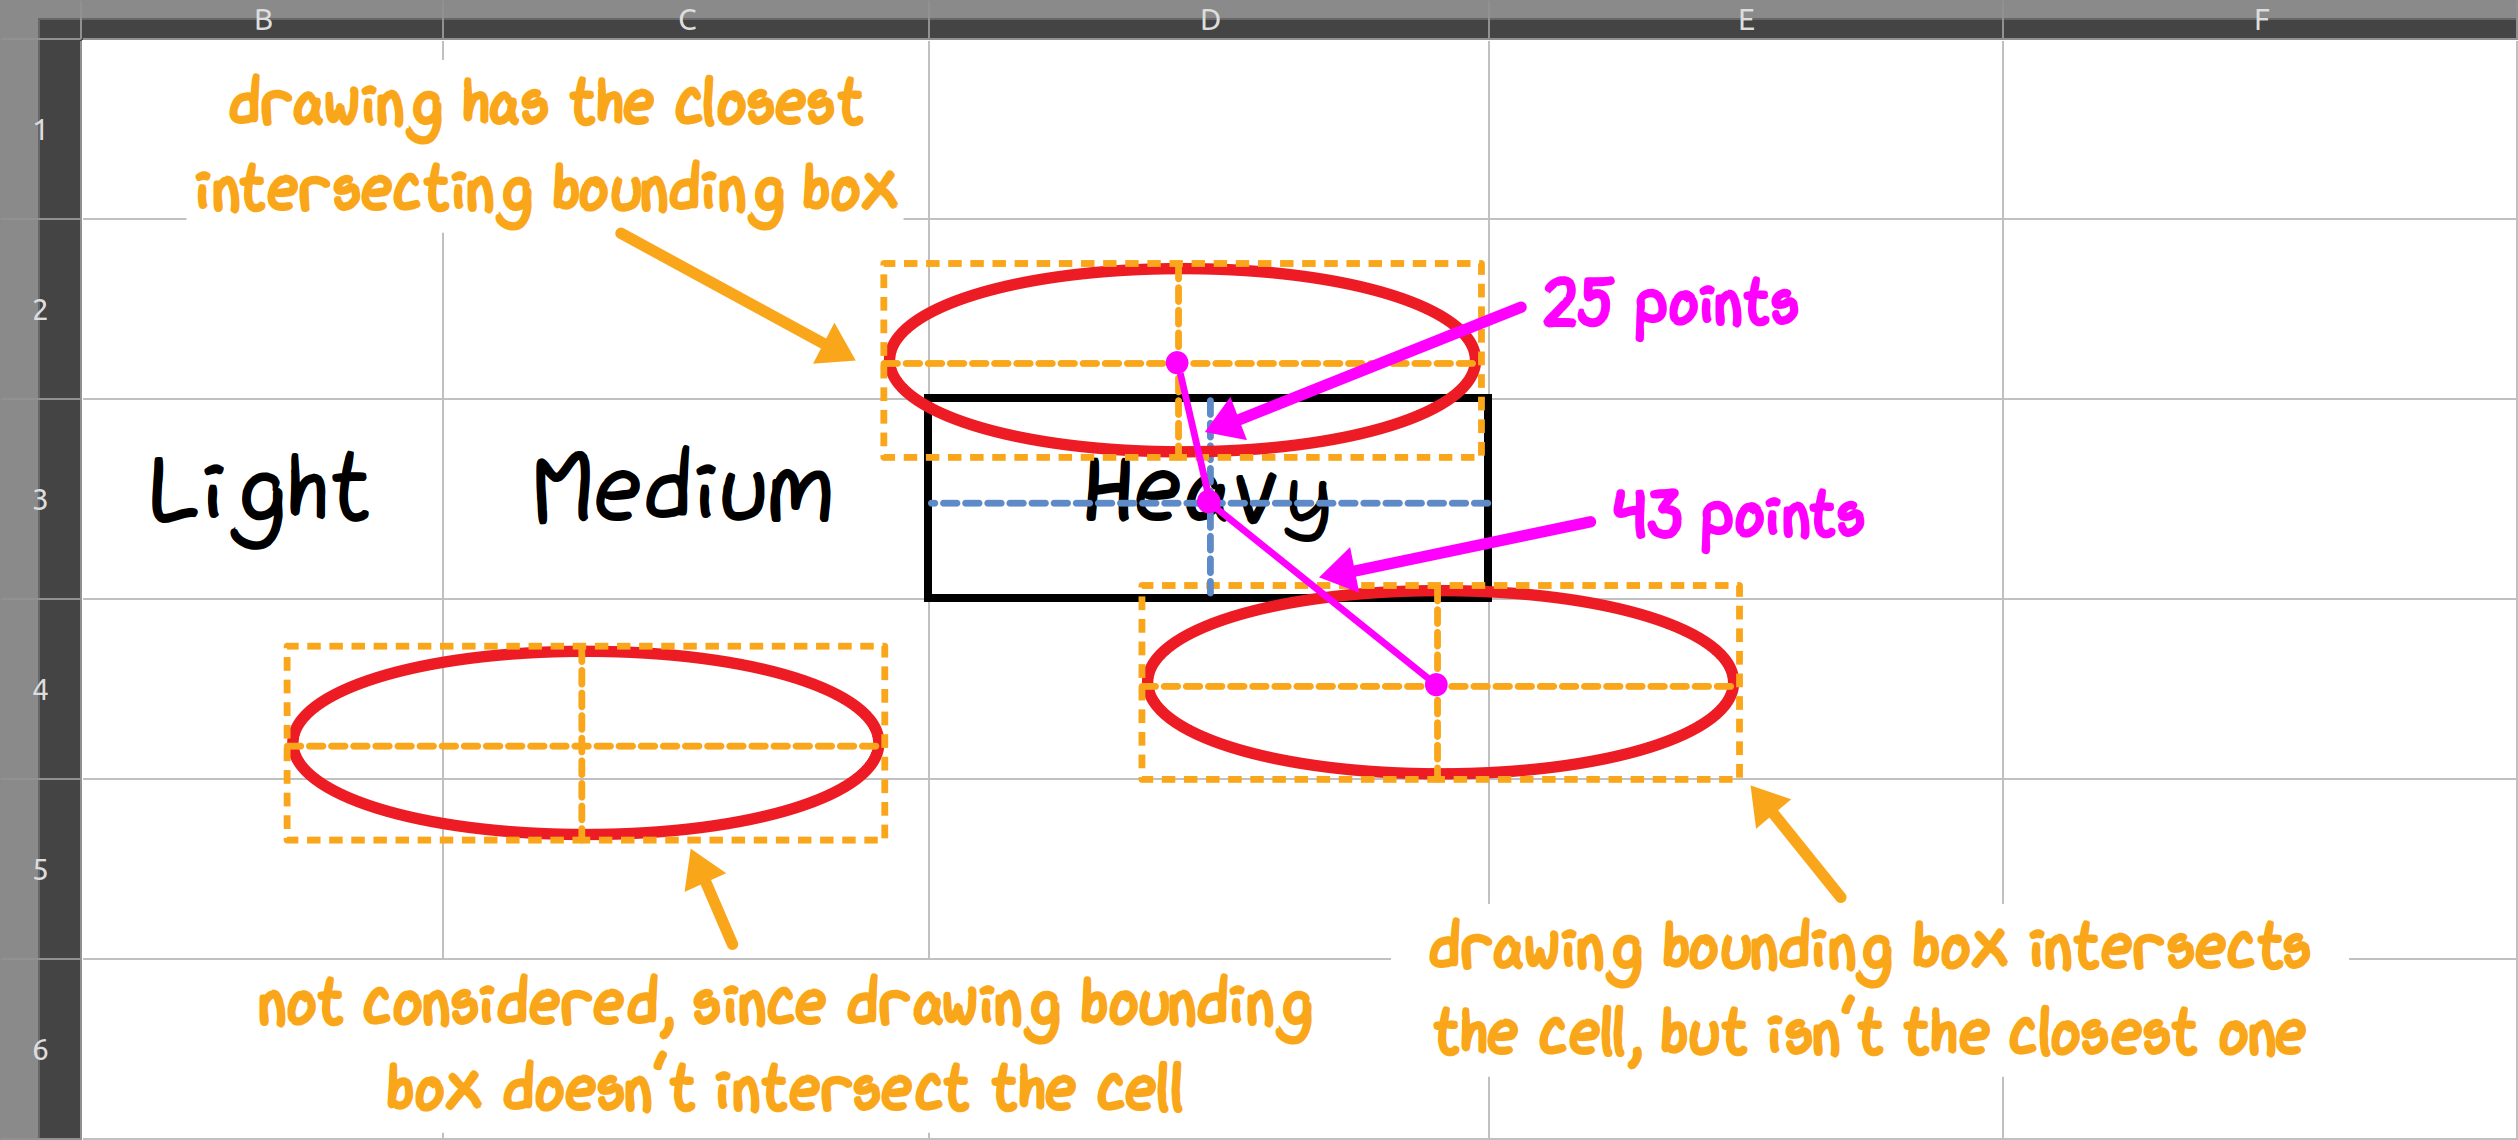 Diagram showing a cell being associated with the closest drawing that intersects with it